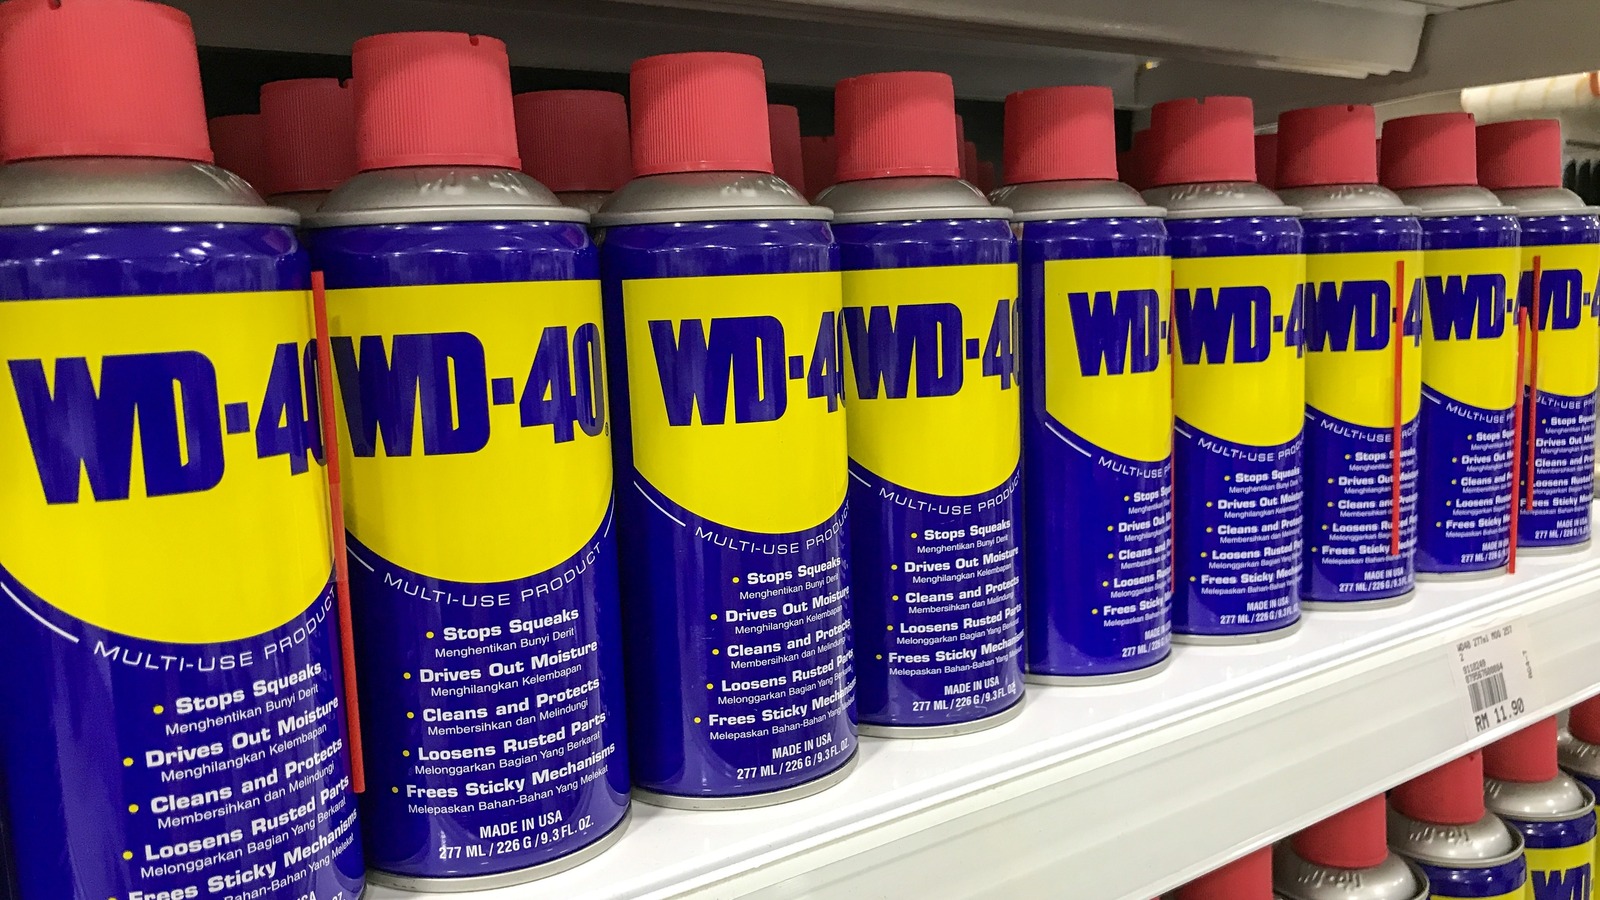 20 Genius Tips For Using WD-40 At Home